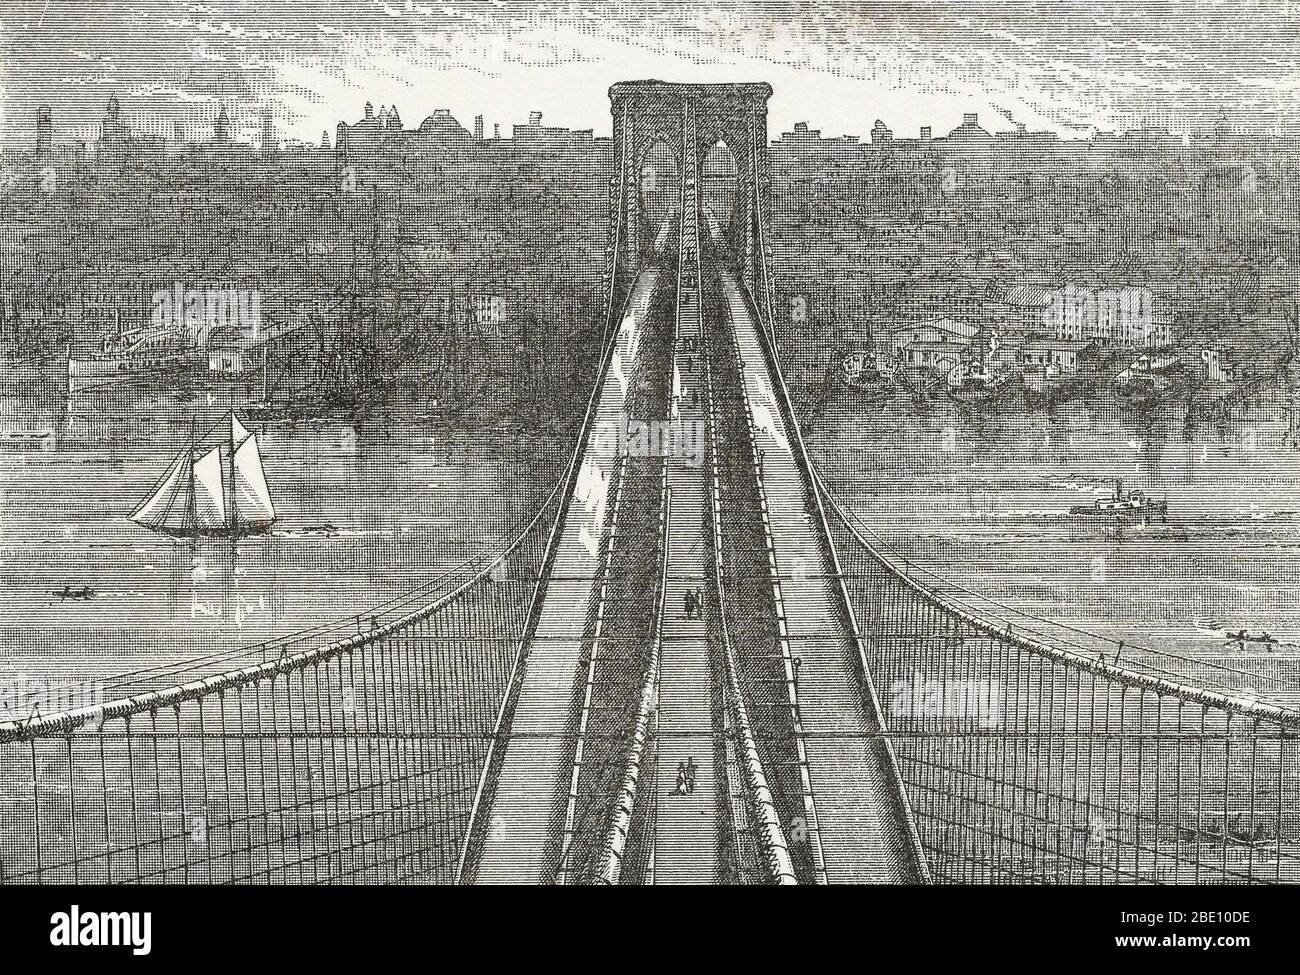 The view from the top of Brooklyn Tower, looking down upon the Brooklyn bridge and towards New York. From an unidentified brochure about the bridge, 1883. The Brooklyn Bridge is one of the oldest suspension bridges in the United States. Completed in 1883, it connects the boroughs of Manhattan and Brooklyn by spanning the East River. With a main span of 1,595.5 feet, it was the longest suspension bridge in the world from its opening until 1903, and the first steel-wire suspension bridge. Originally referred to as the New York and Brooklyn Bridge and as the East River Bridge, it was formally nam Stock Photo